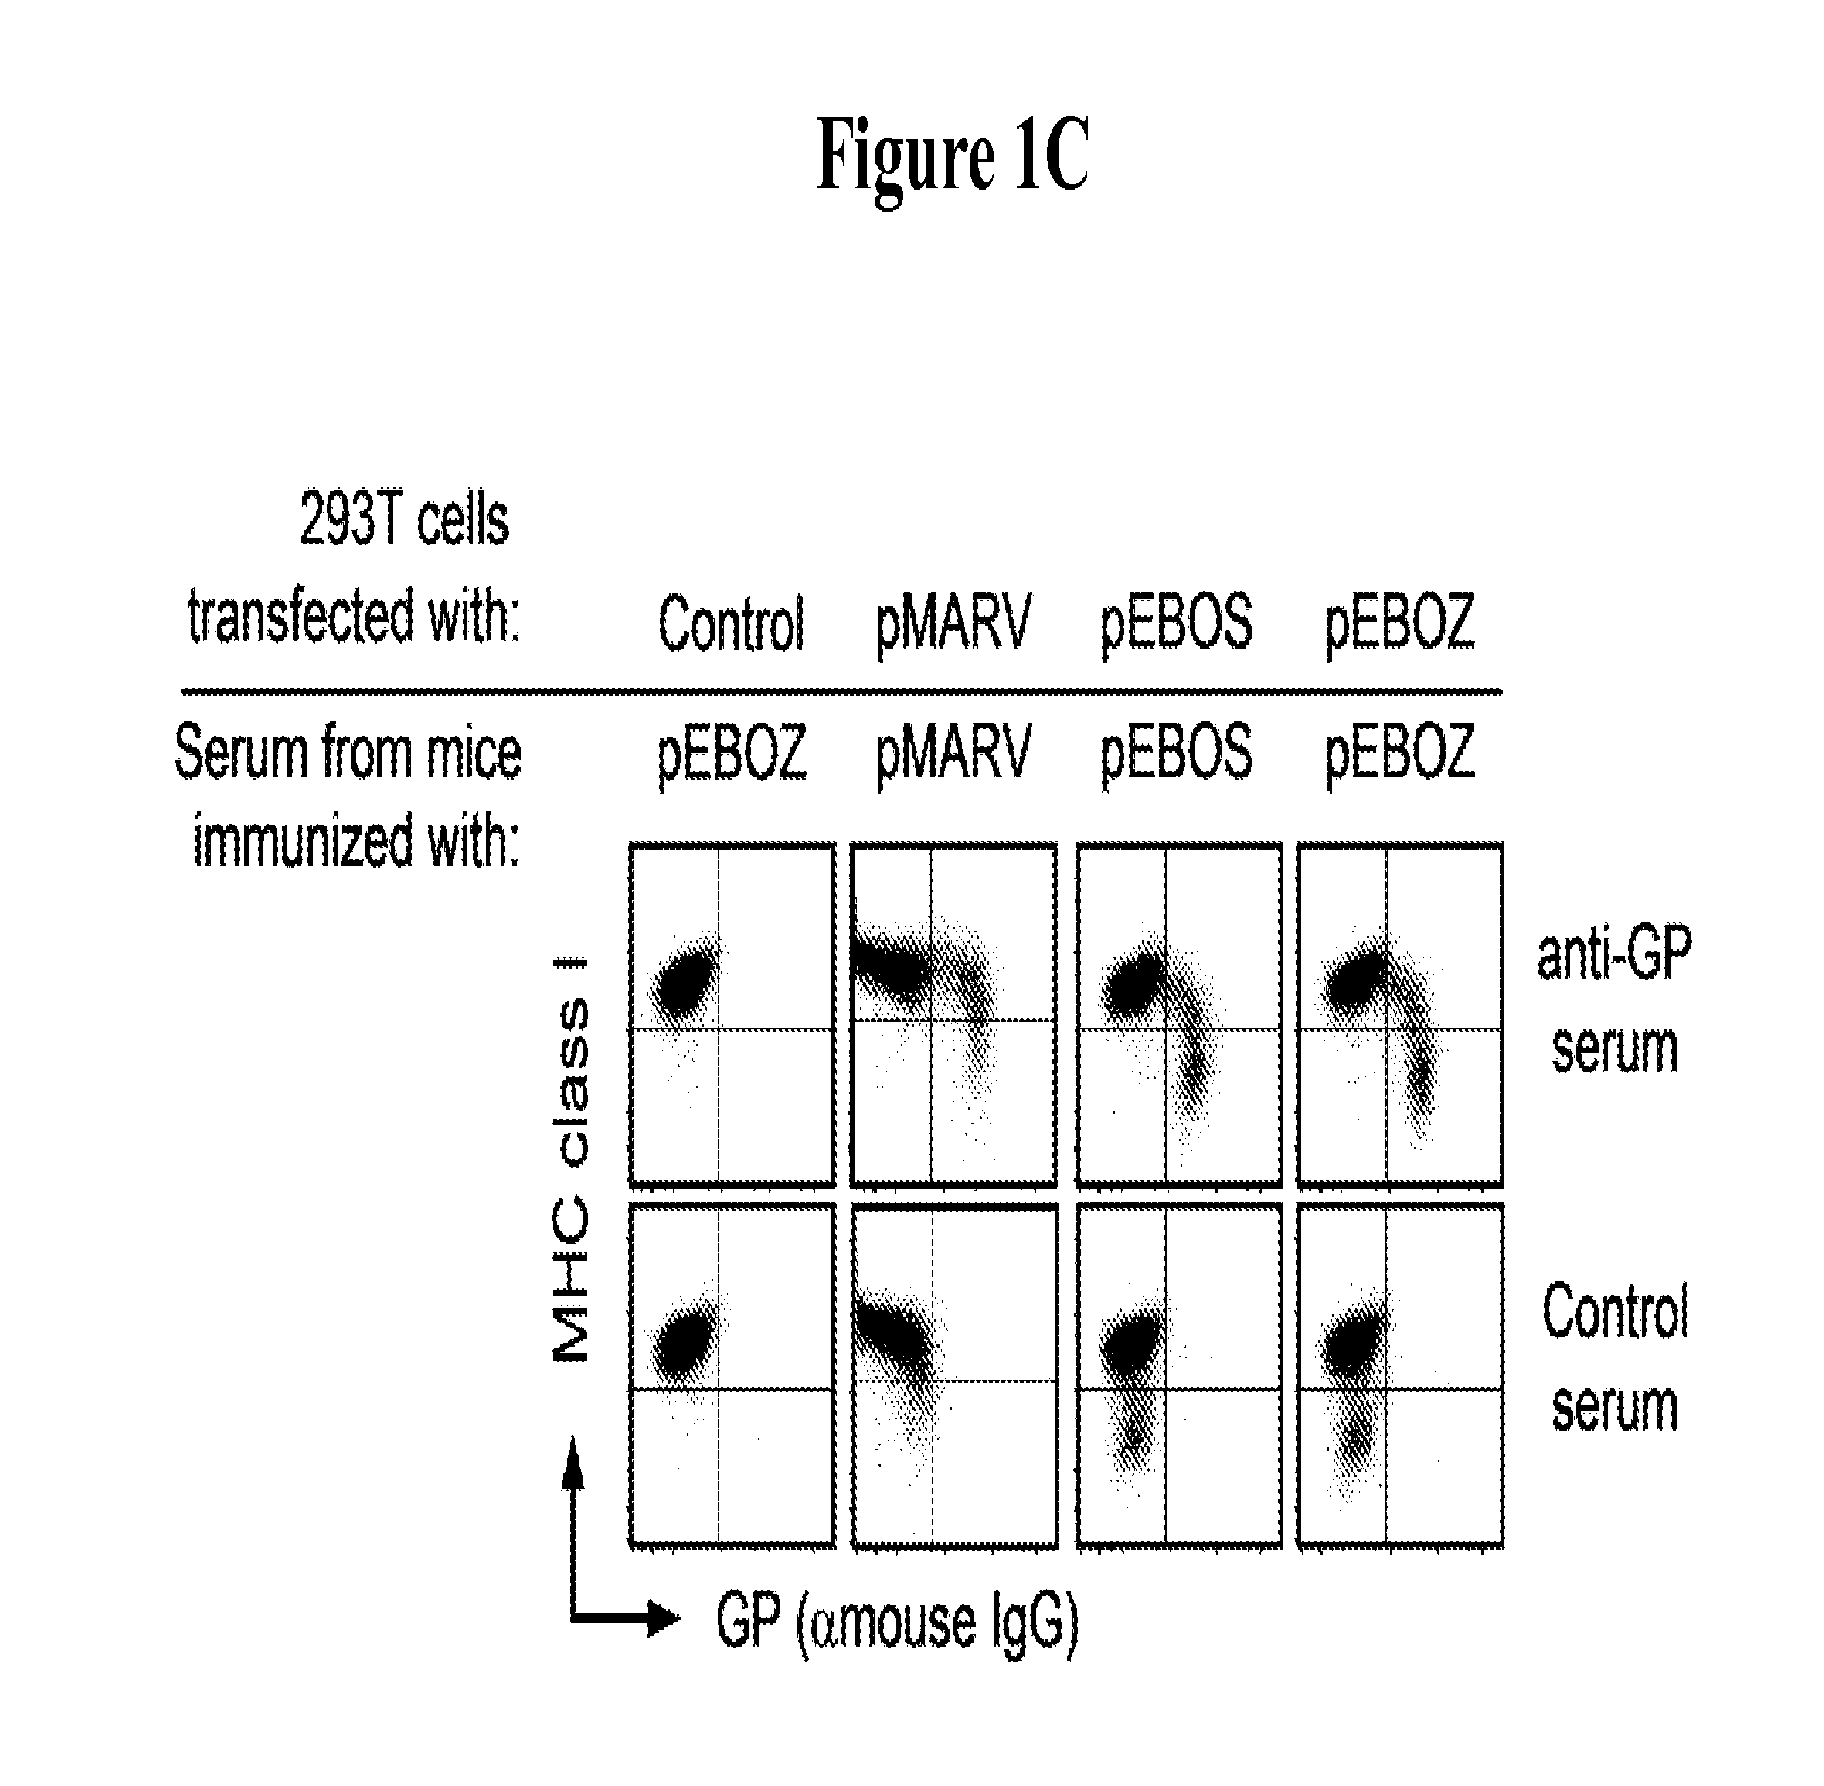 Filovirus Consensus Antigens, Nucleic Acid Constructs And Vaccines Made Therefrom, And Methods Of Using Same